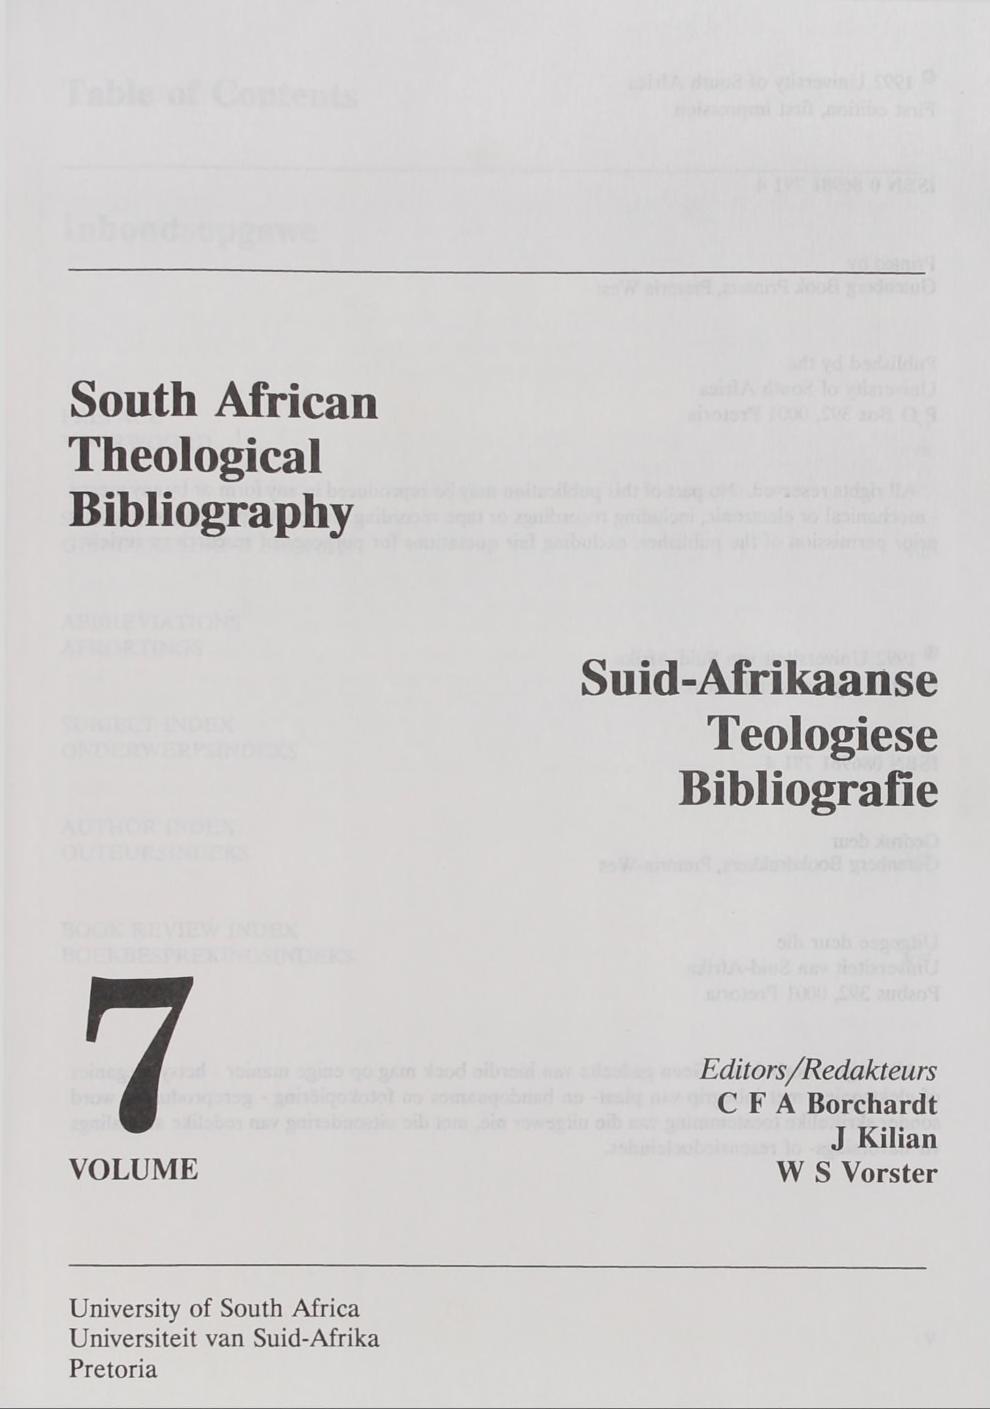 South African Theological Bibliography Suid-Afrikaanse Teologiese Bibliografie 7 VOLUME